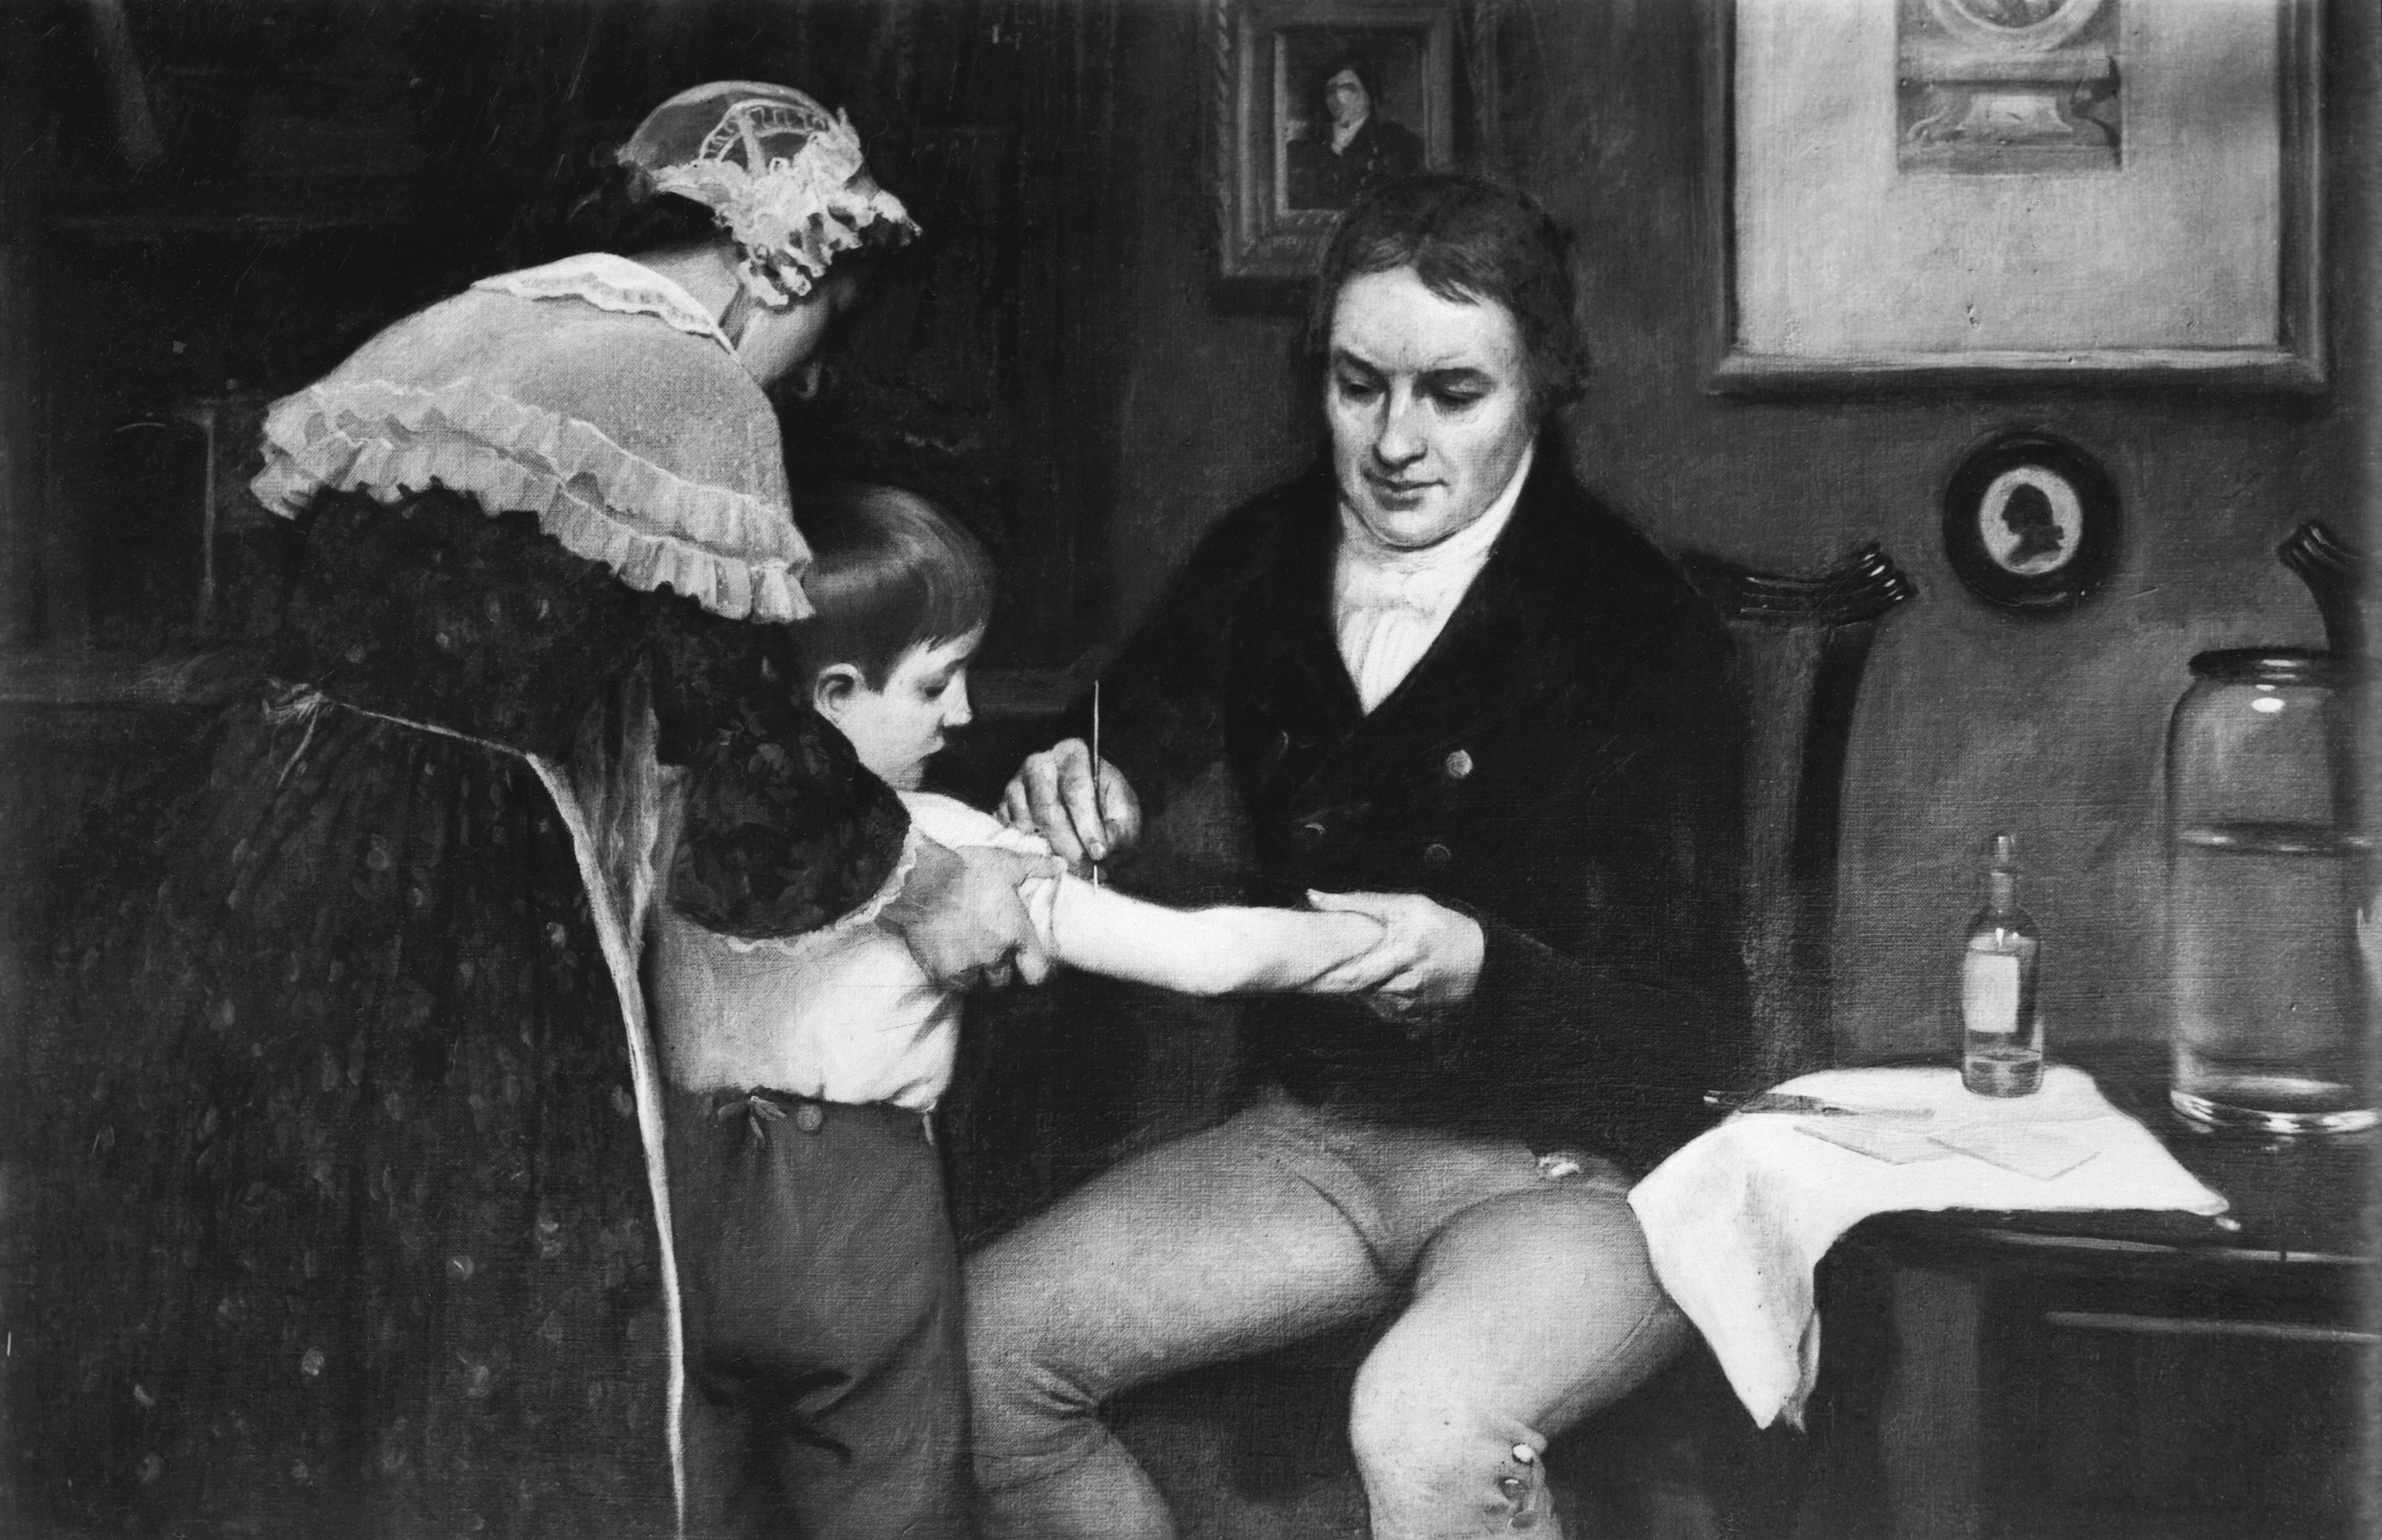 Dr. Edward Jenner (1749-1823) performing his first vaccination on James Phipps on May 14, 1796. Painting by E. Board in the Welcome Museum, London. Undated painting. (Bettmann Archive/Getty Images)